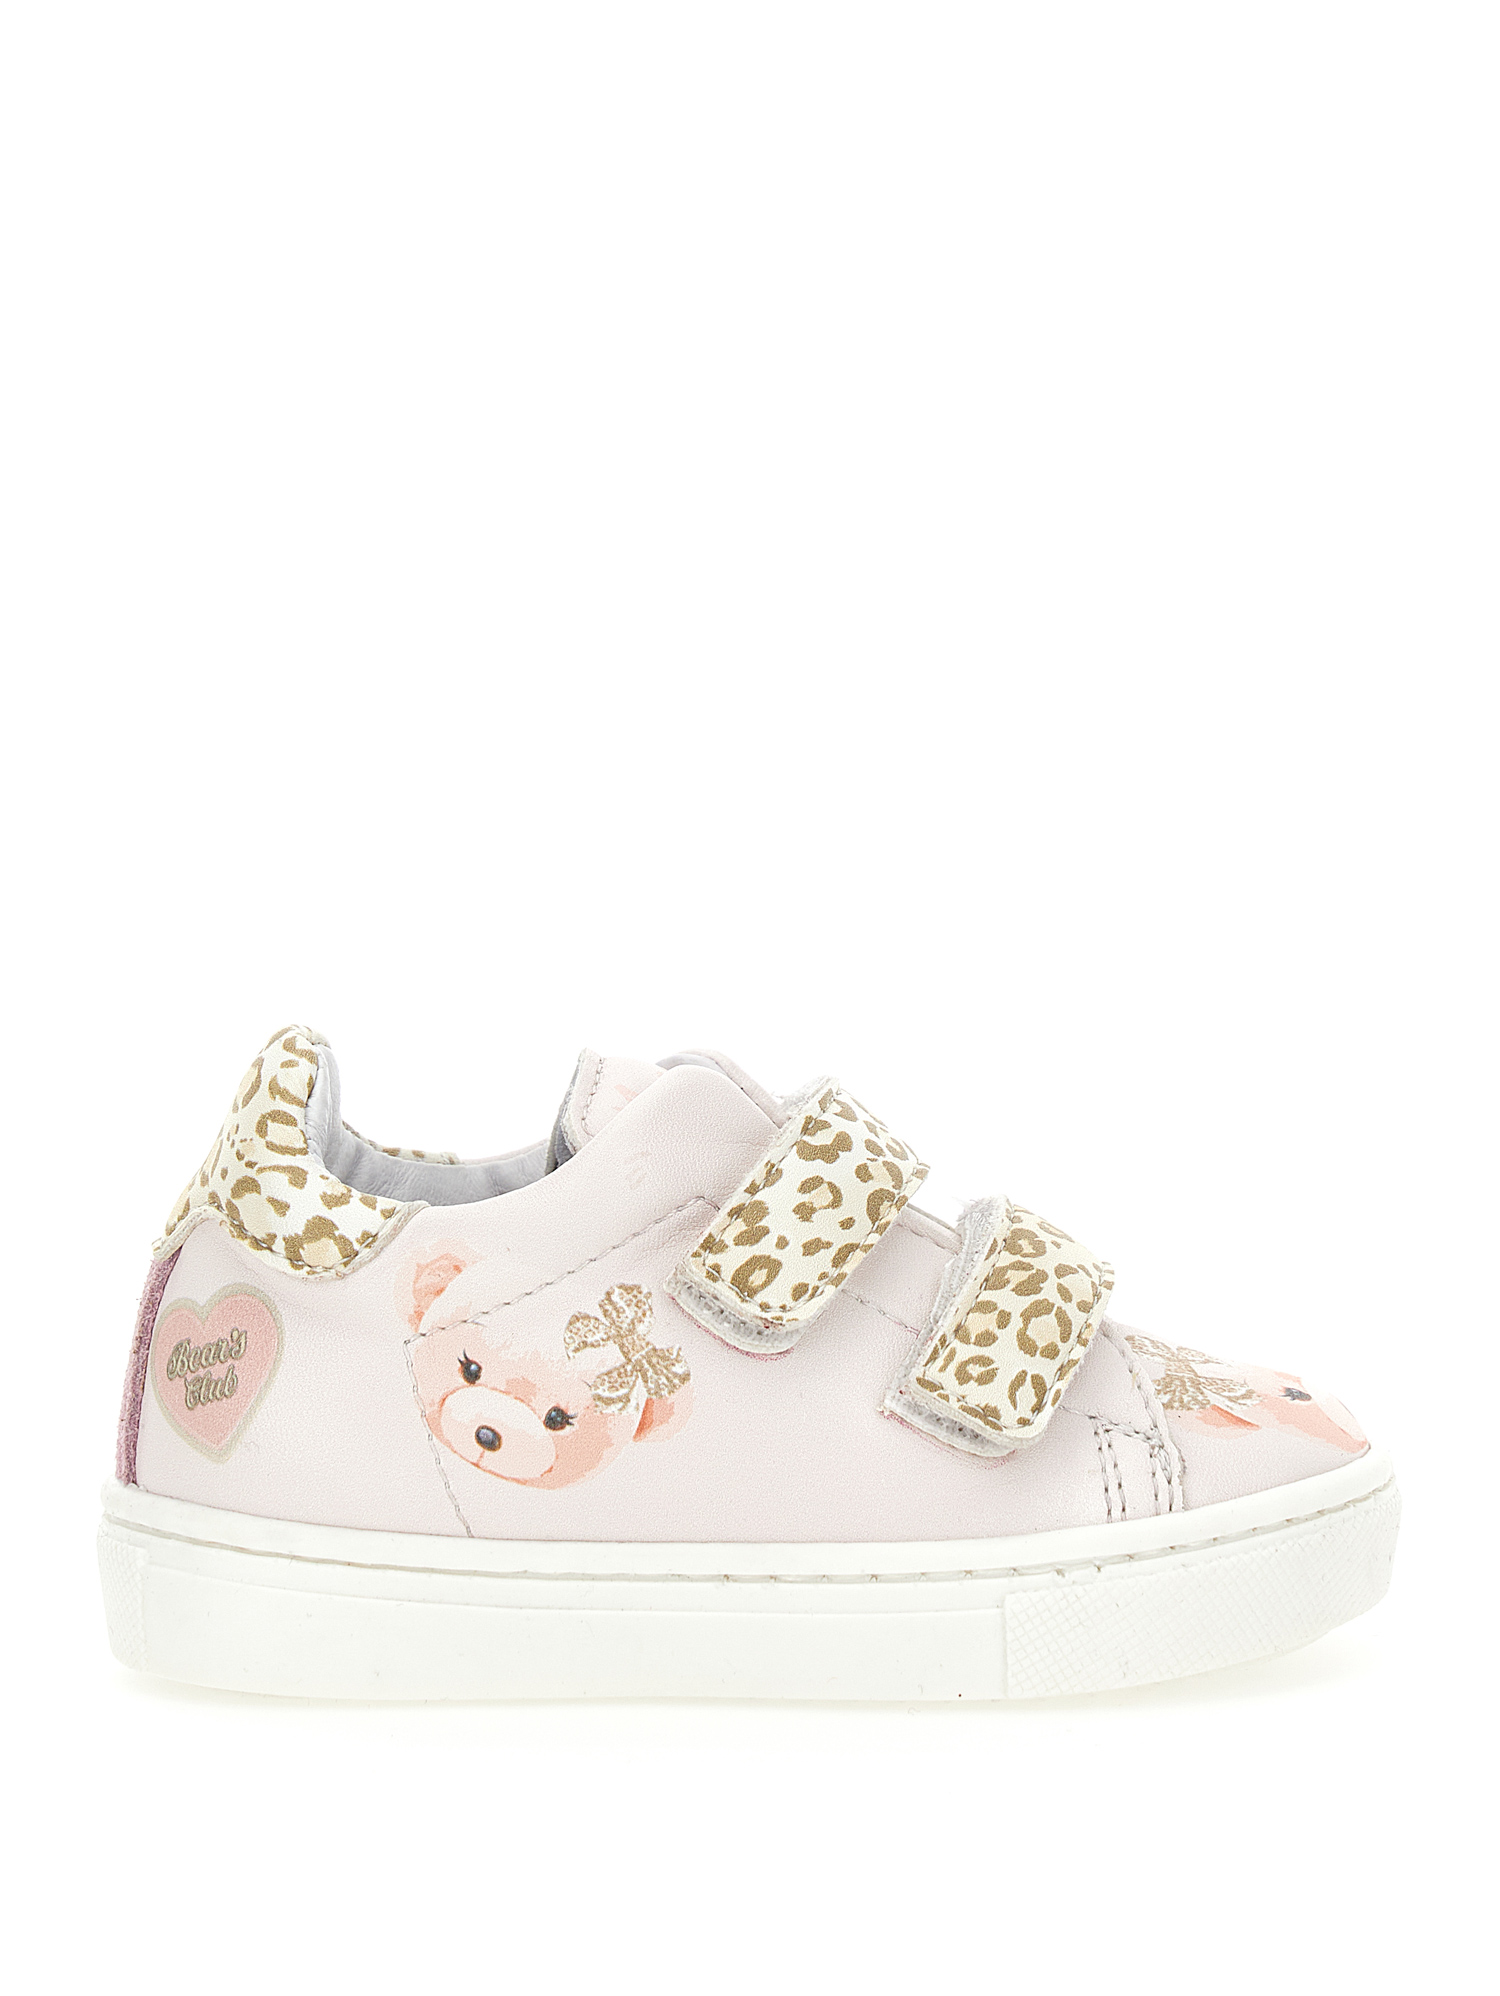 Monnalisa Animal Print Coated Fabric Sneakers In Pink + Spotted